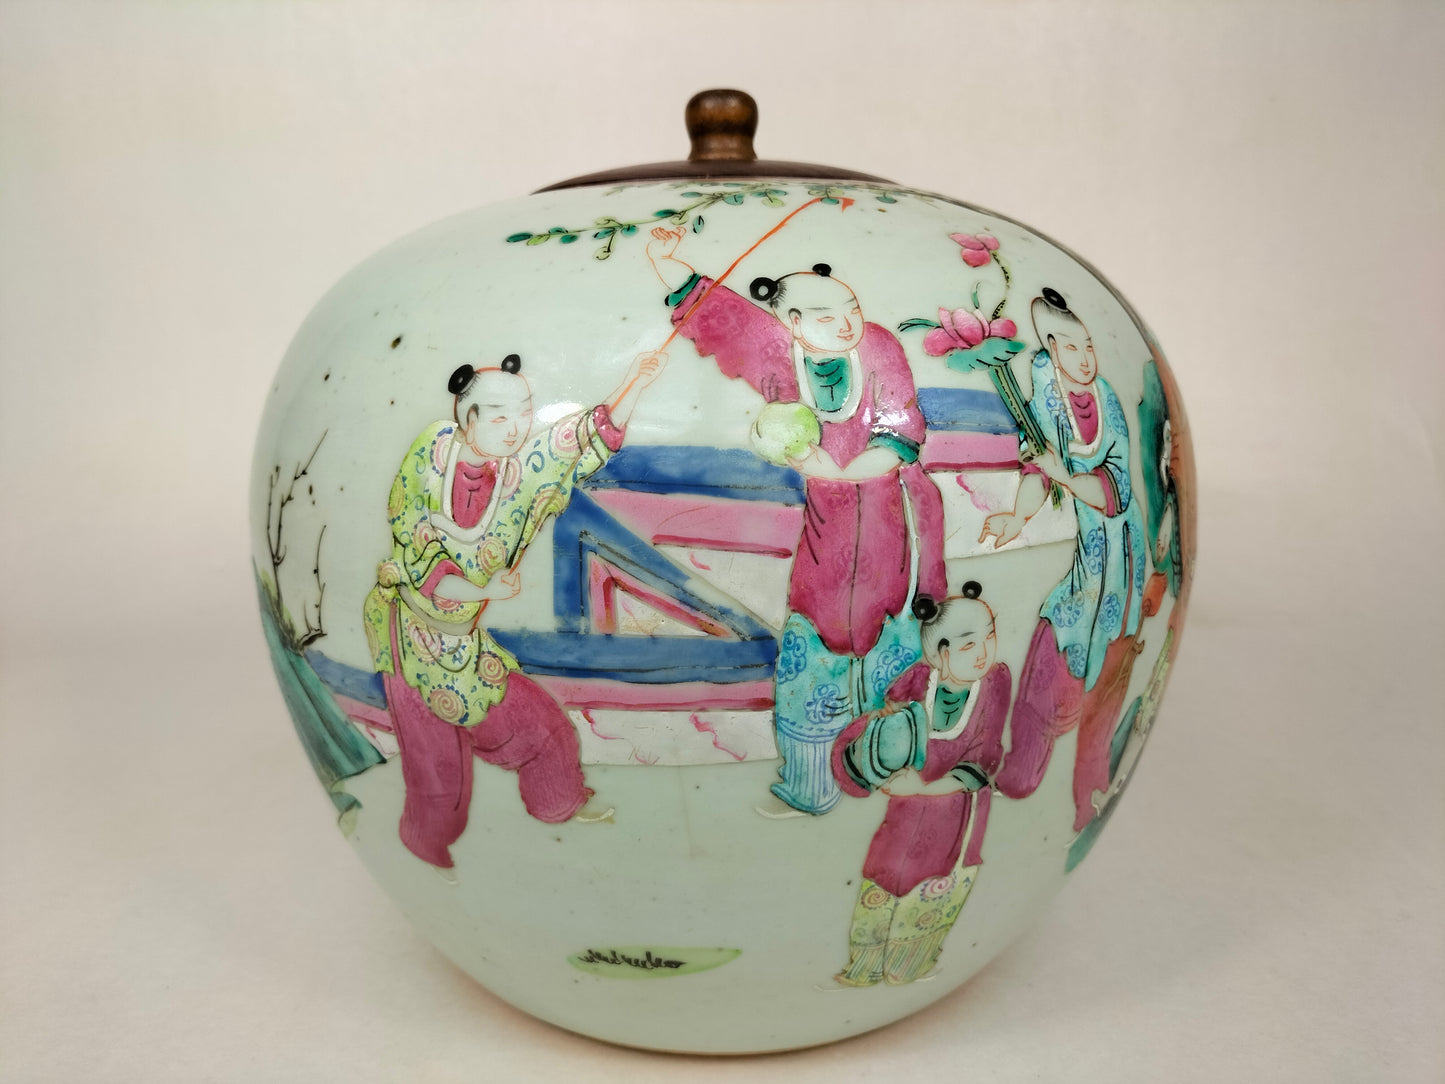 Antique Chinese famille rose ginger jar decorated with figures and bats // Qing Dynasty - 19th century